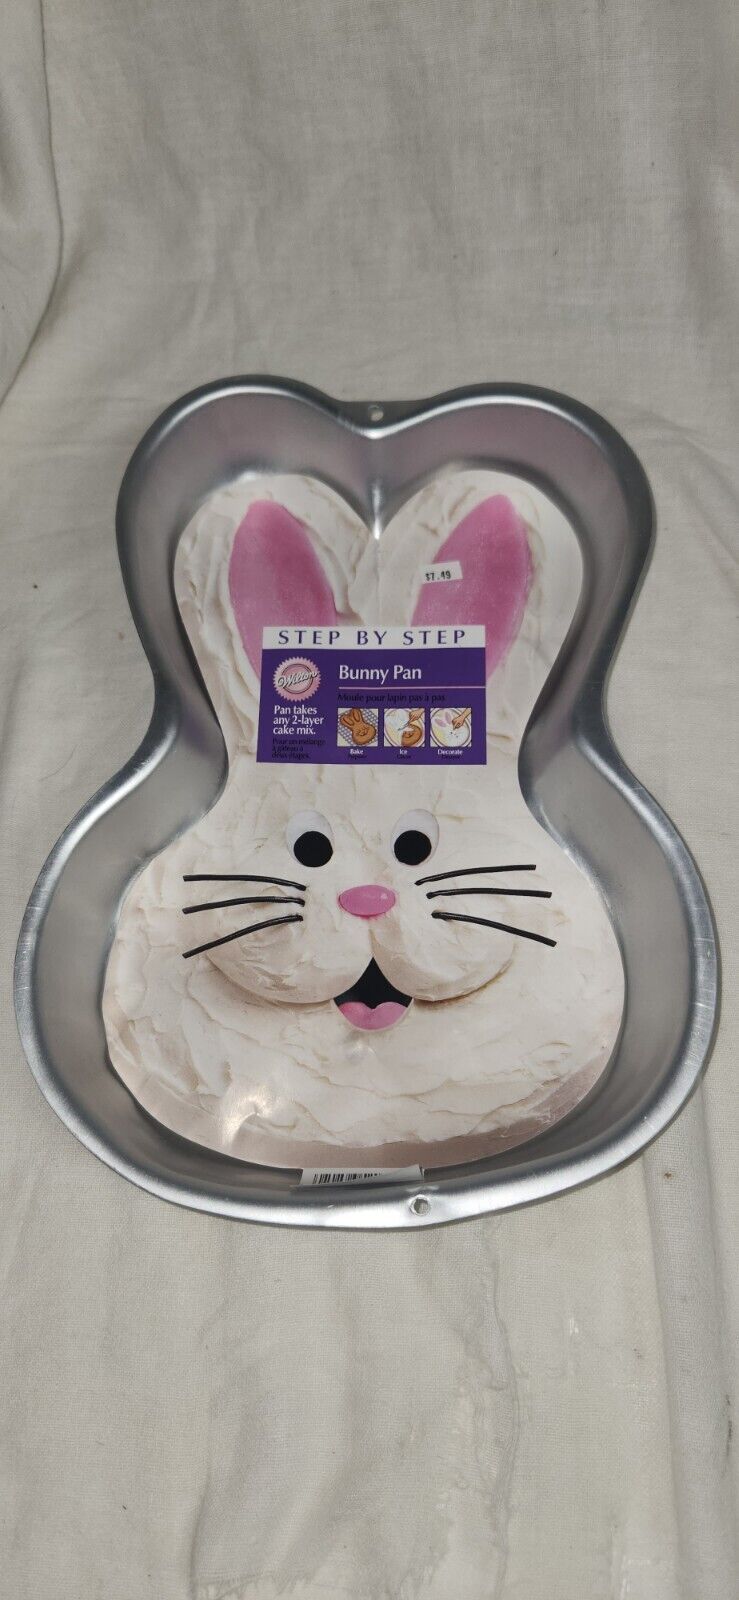 Wilton Aluminum Step by Step 2 Layer Bunny Pan Cake 2003 2105-2074